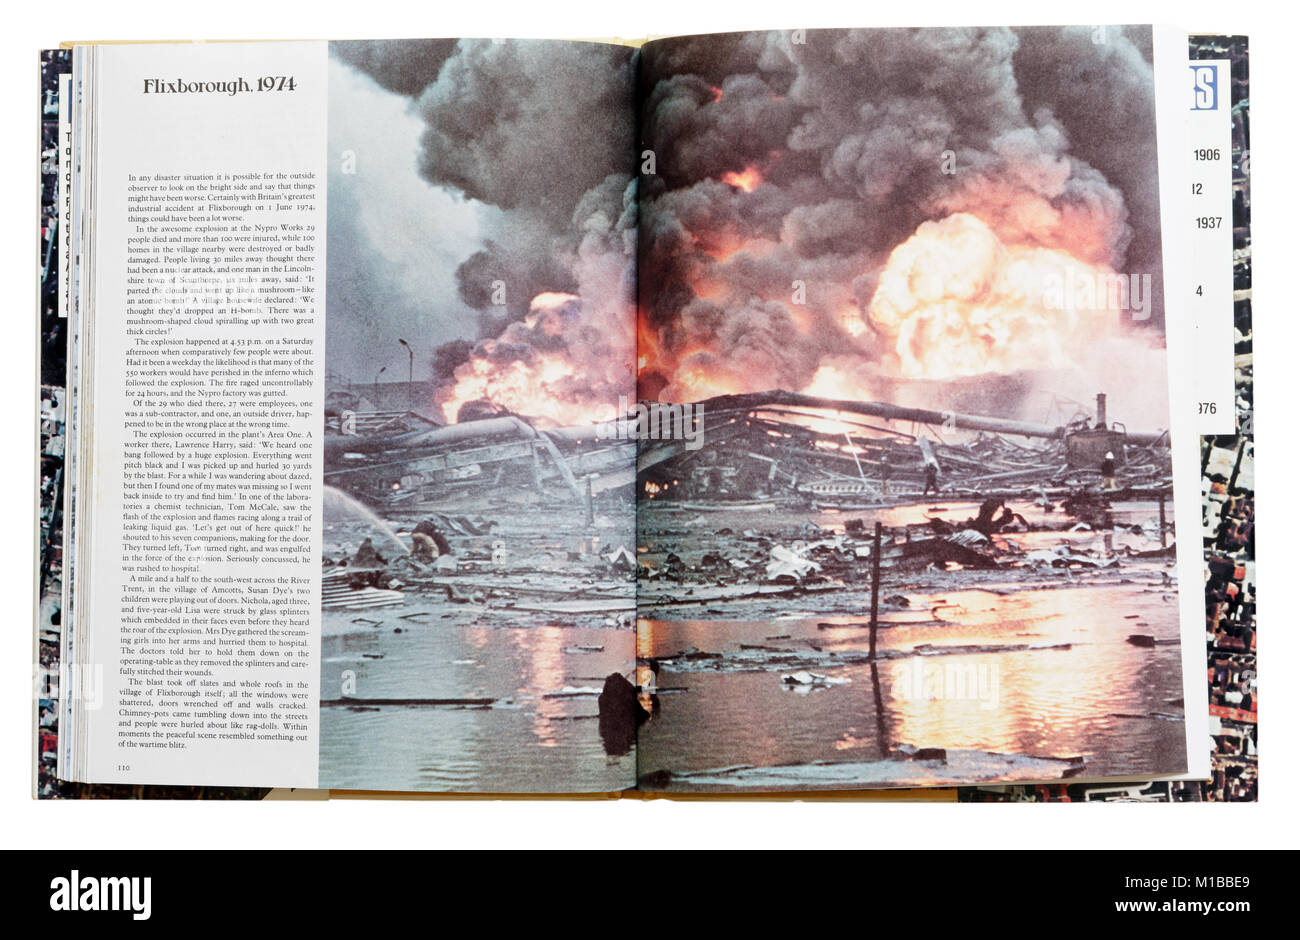 A book of disasters open to the page about the 1974 Flixborough explosion Stock Photo